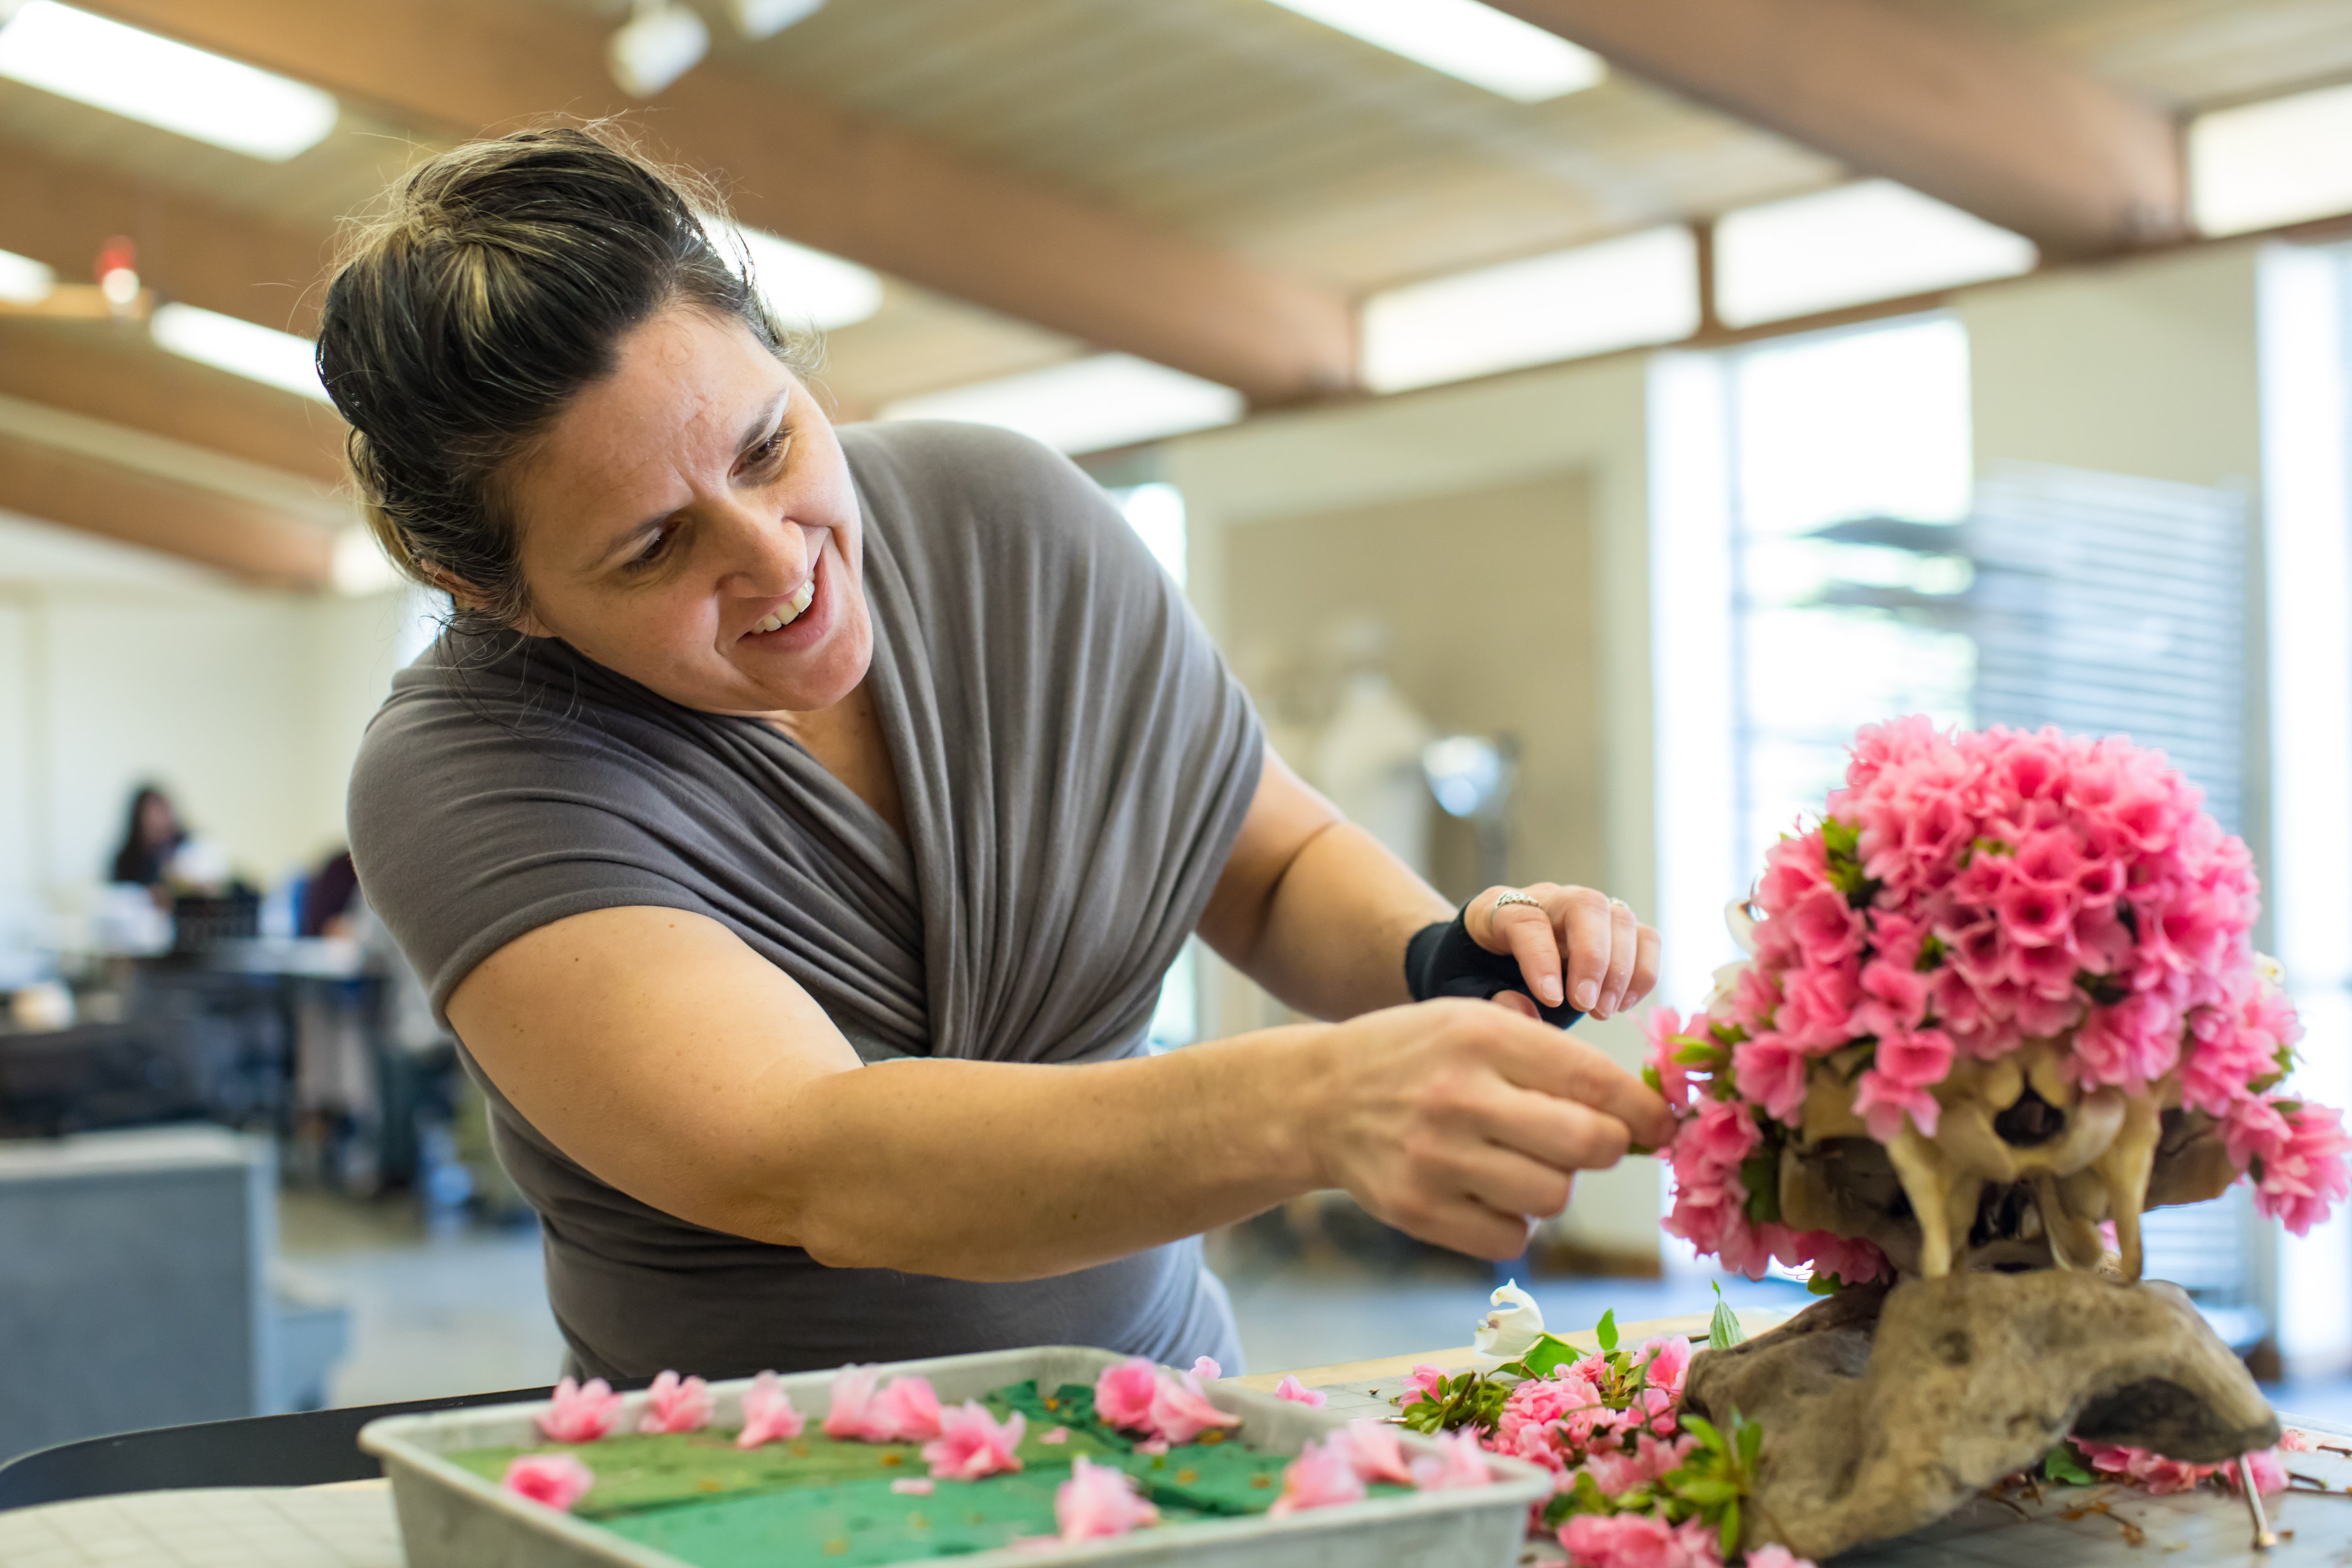 Angie Hoagin decorating a sculpture with pink flowers